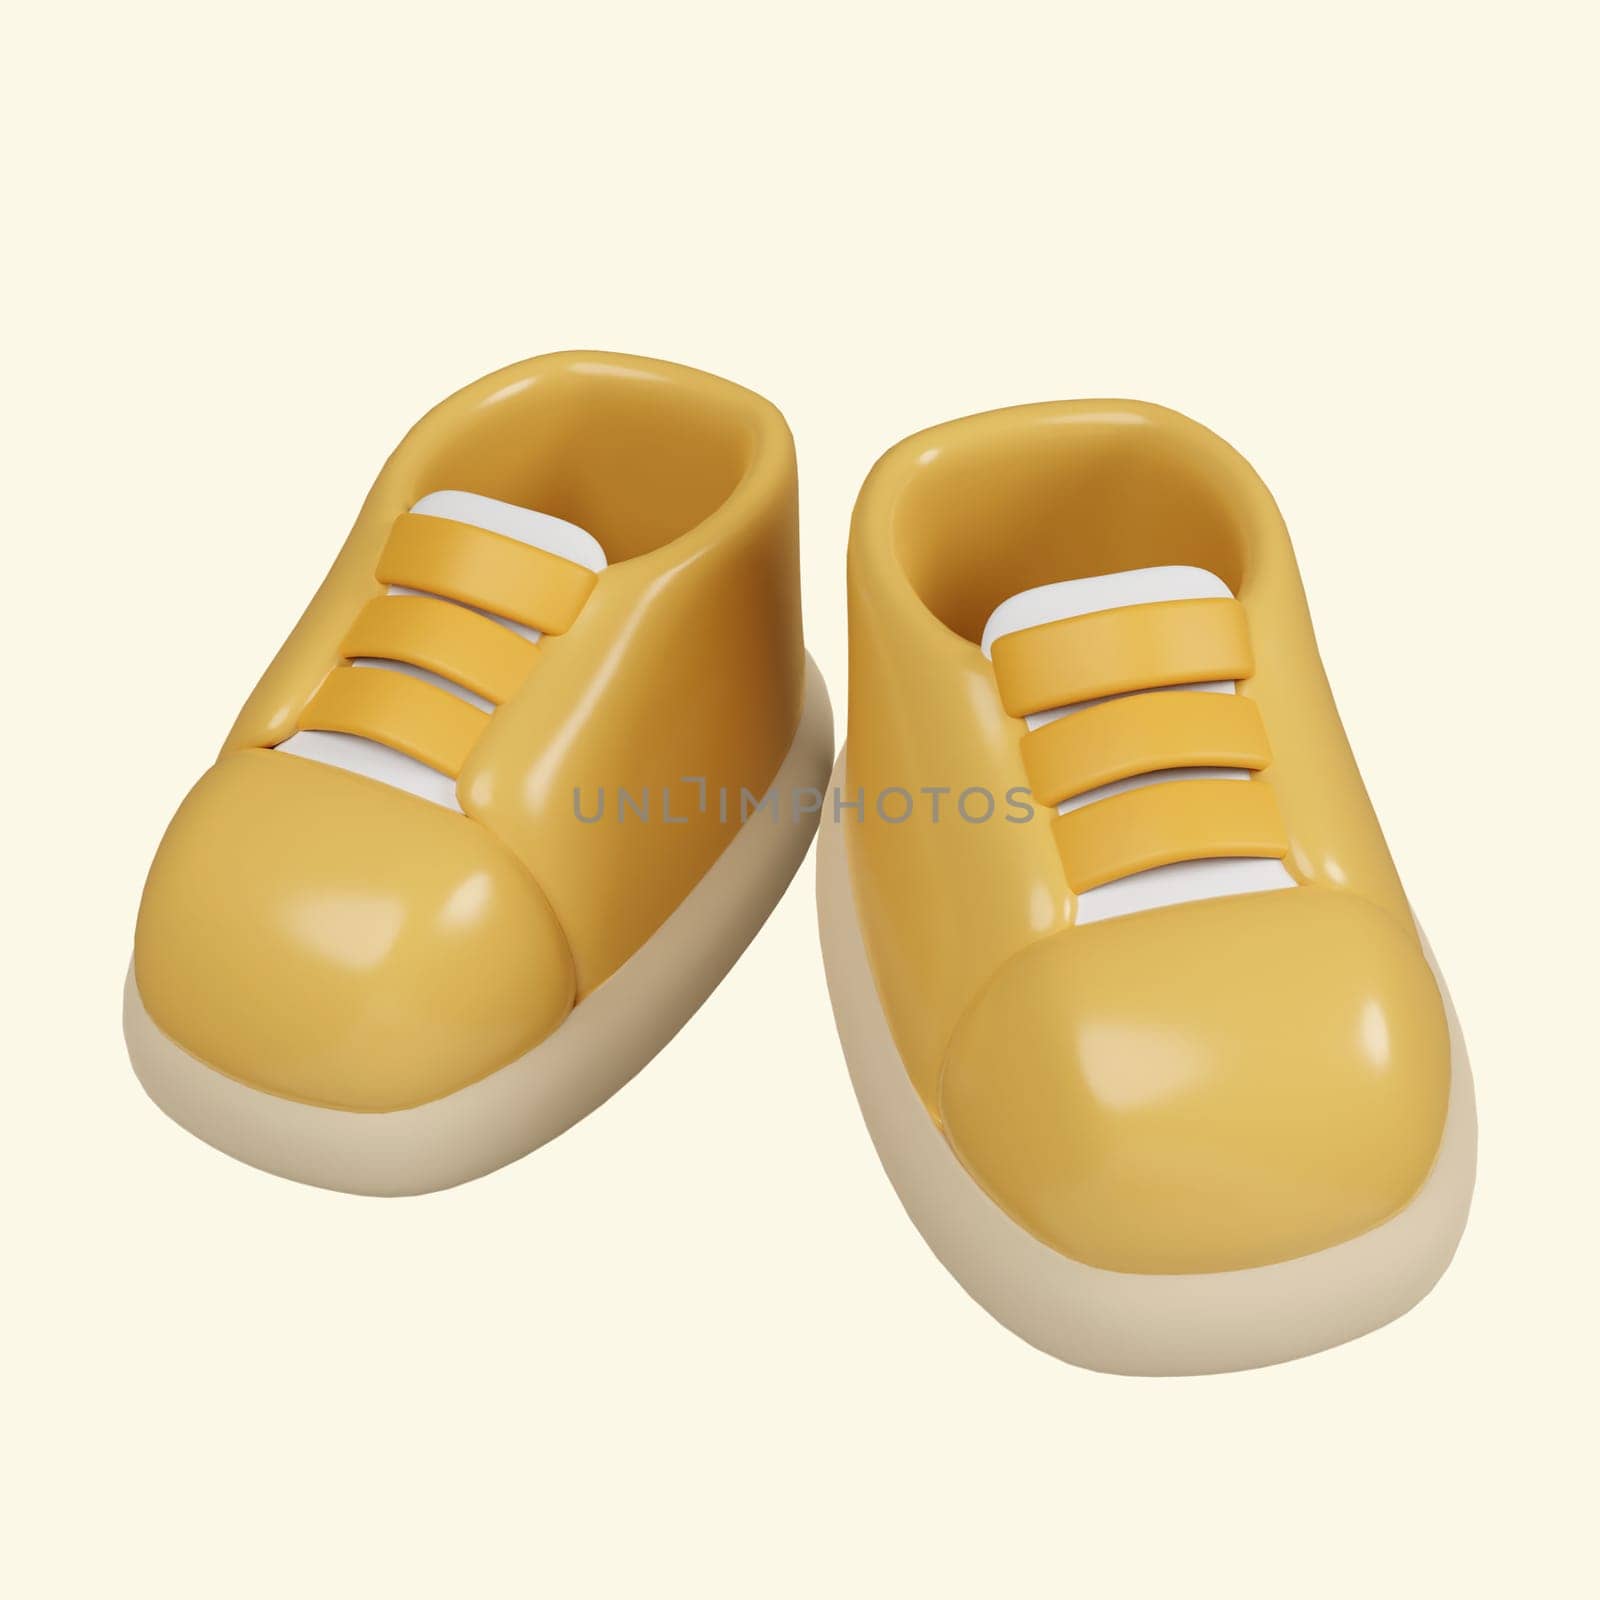 3d sneakers. Fitness and health. Exercise equipment. icon isolated on yellow background. 3d rendering illustration. Clipping path. by meepiangraphic